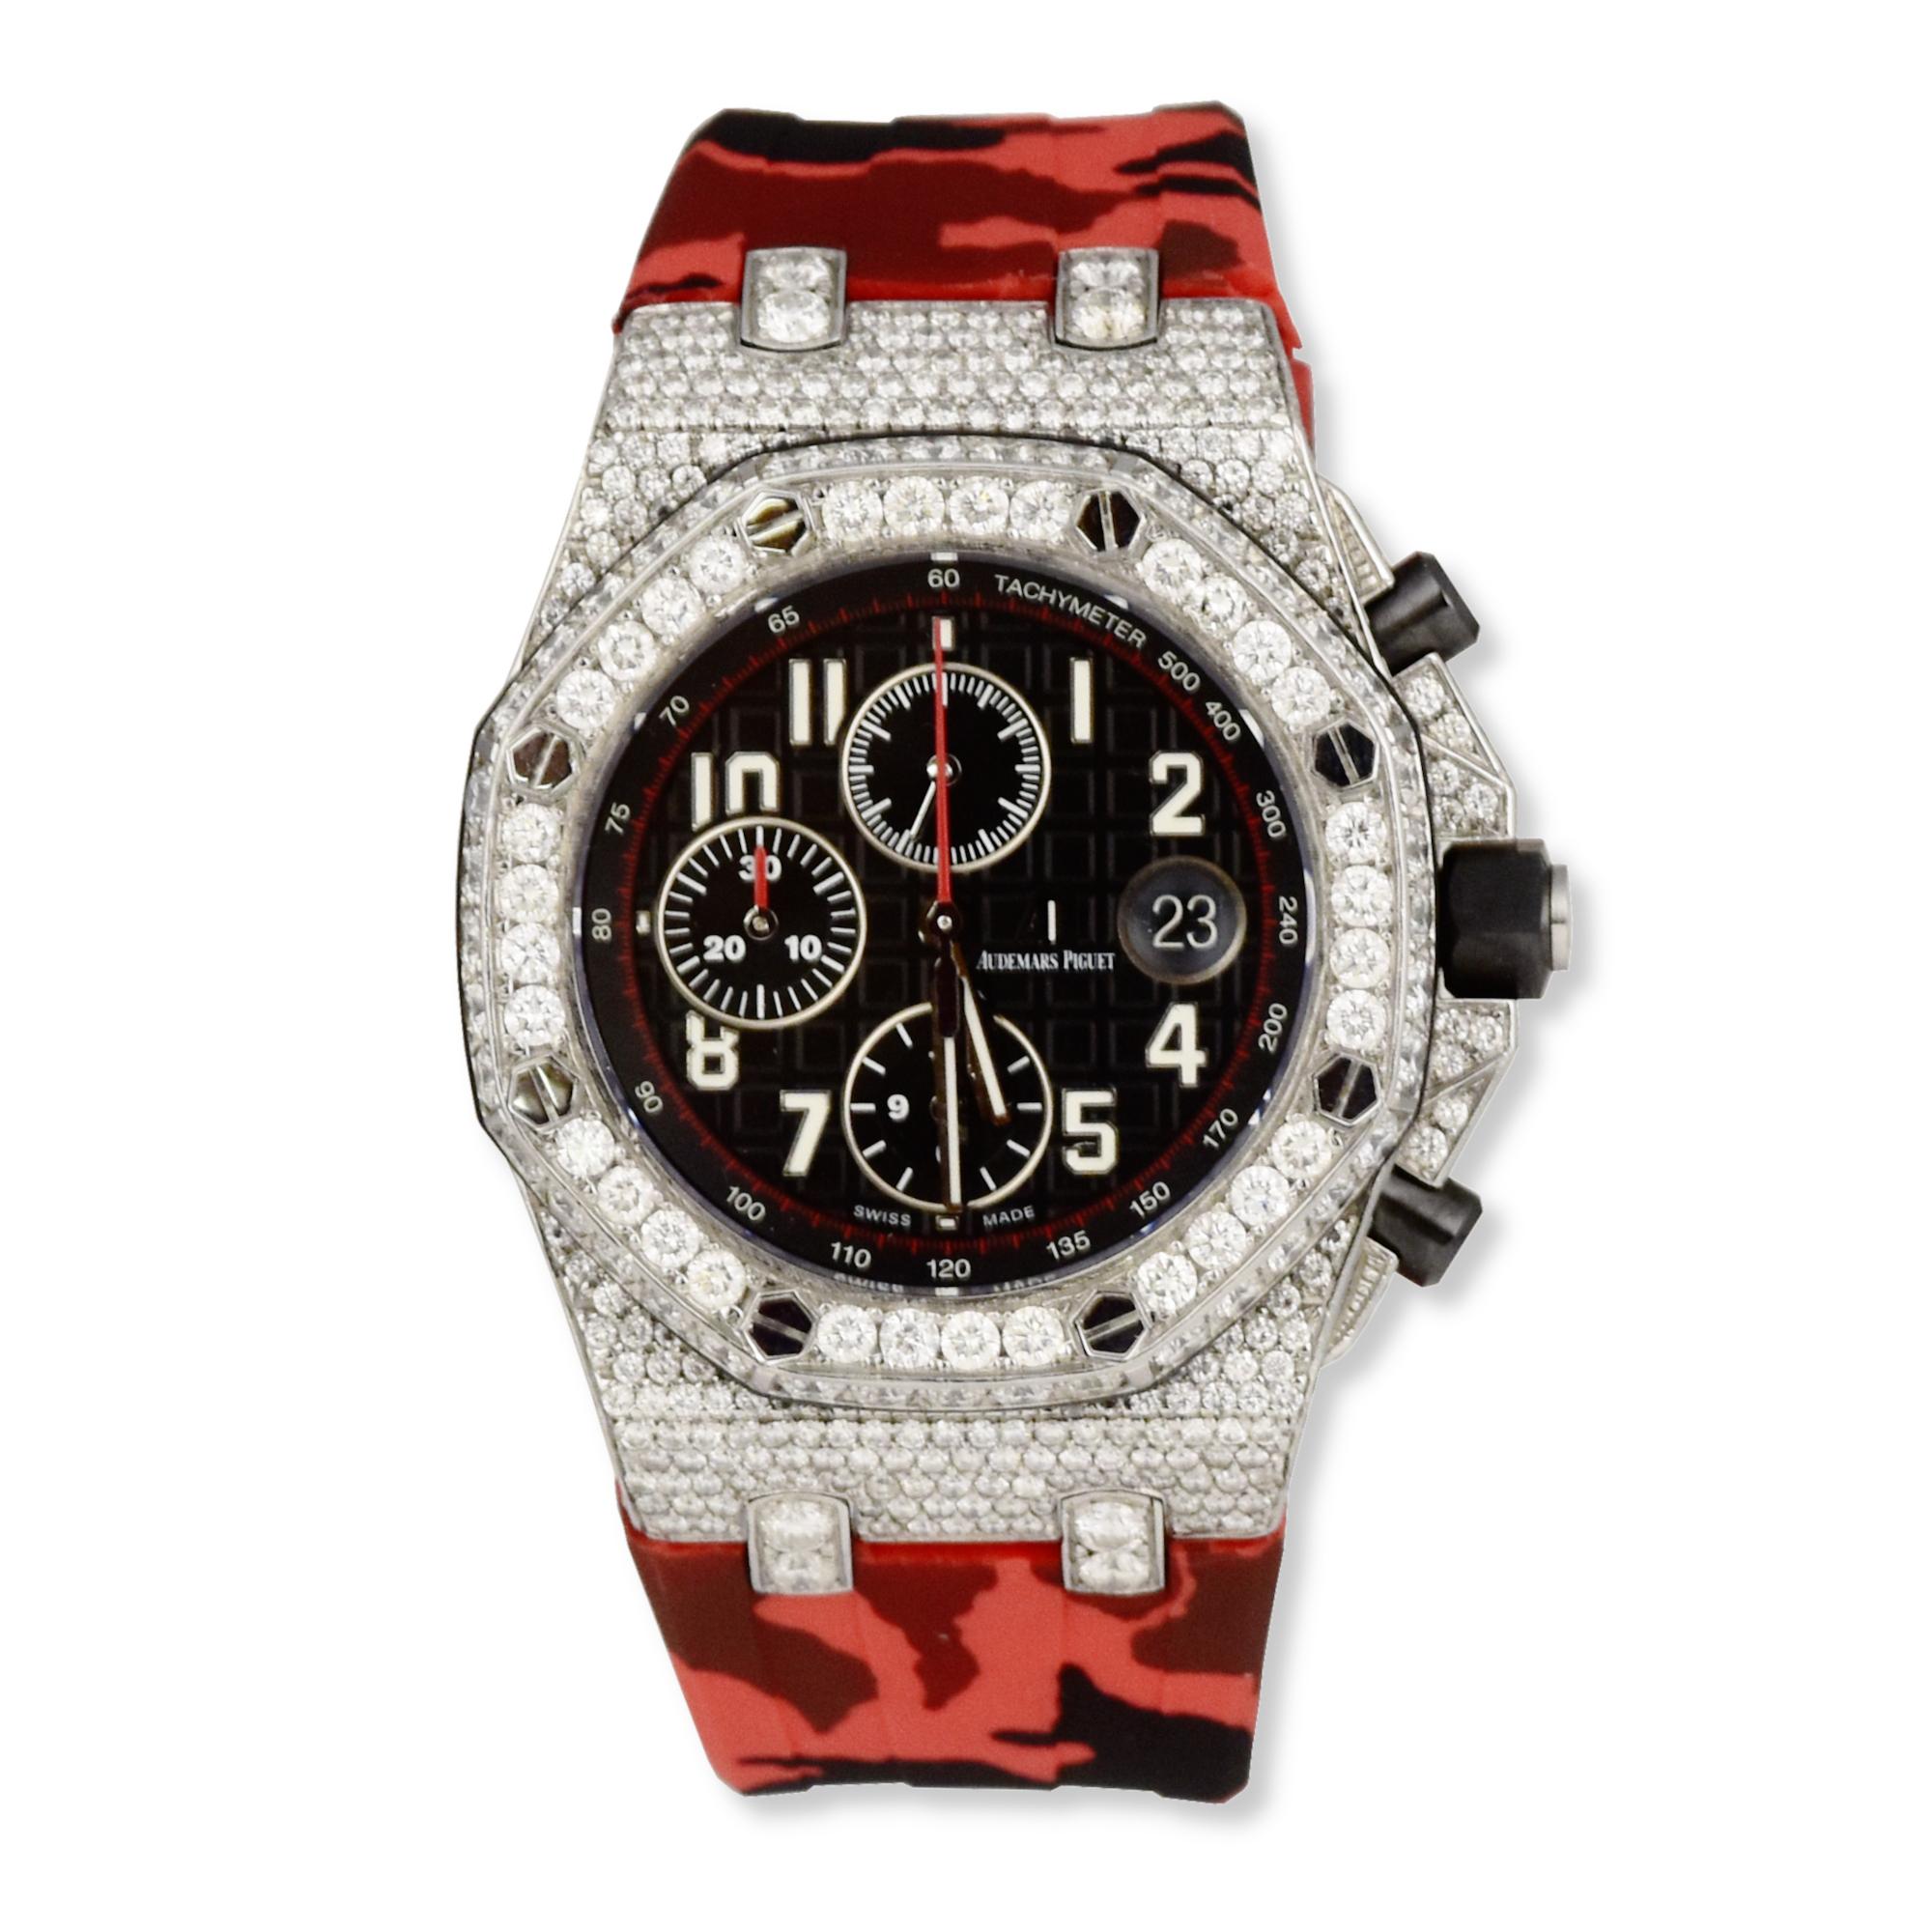 Brand: Audemars Piguet
Band Color: Red Camo
Band Material: Rubber
Case Material: Stainless Steel
Case Size: 42.0mm
Dial Color: Black
Model: Royal Oak Offshore
Modified Item: Yes
Movement: Automatic Self Wind
Reference Number: 25721TI.00.1000TI.06.A